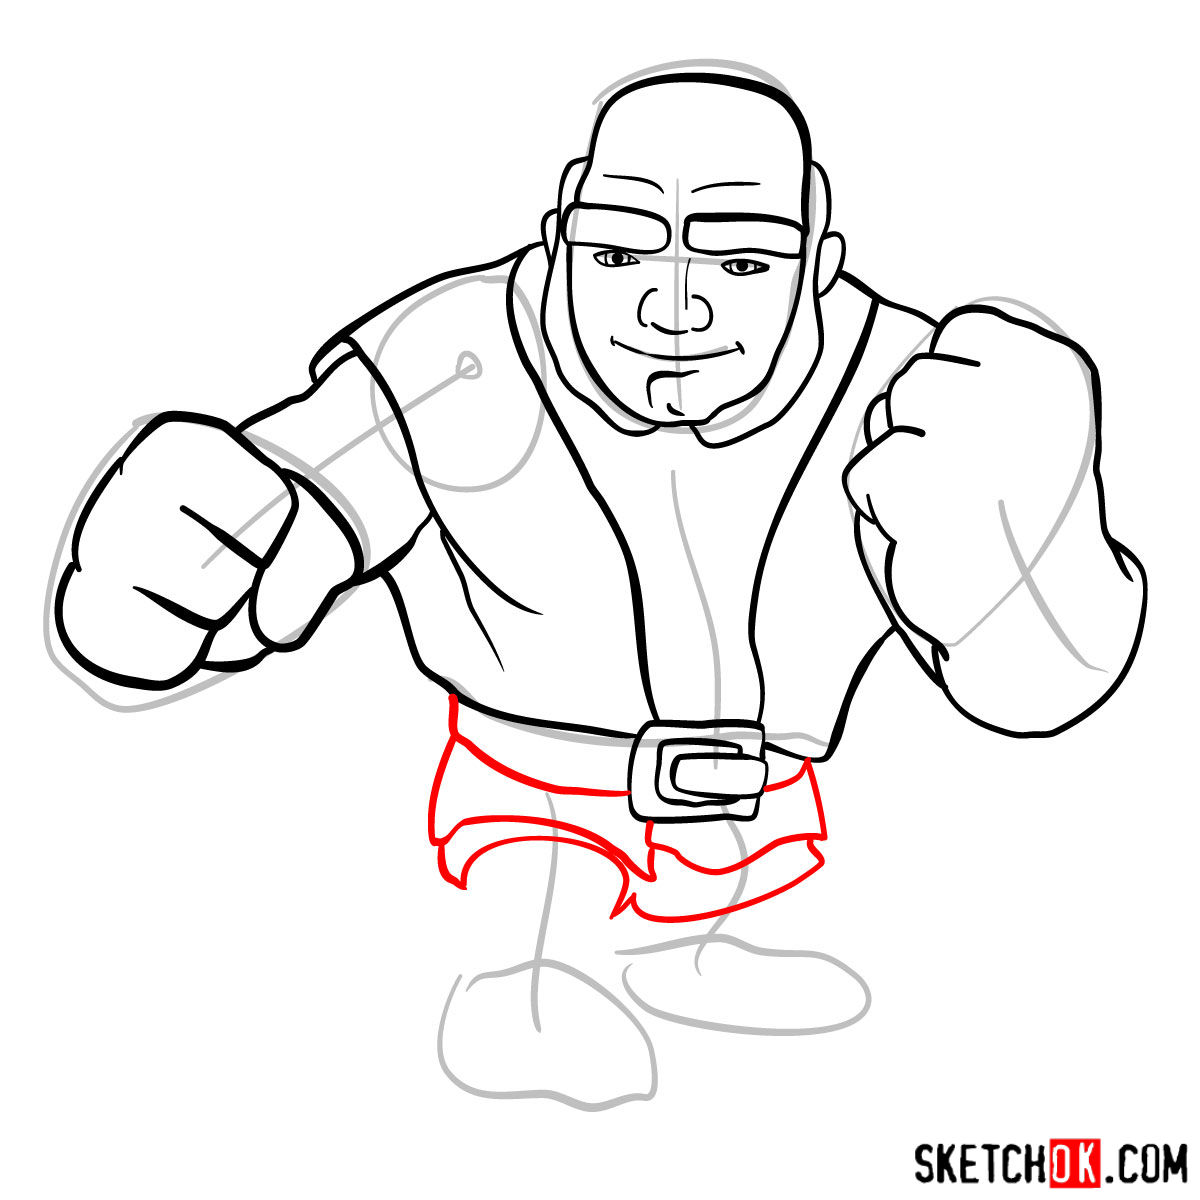 How to draw Giant from Clash of Clans - step 08